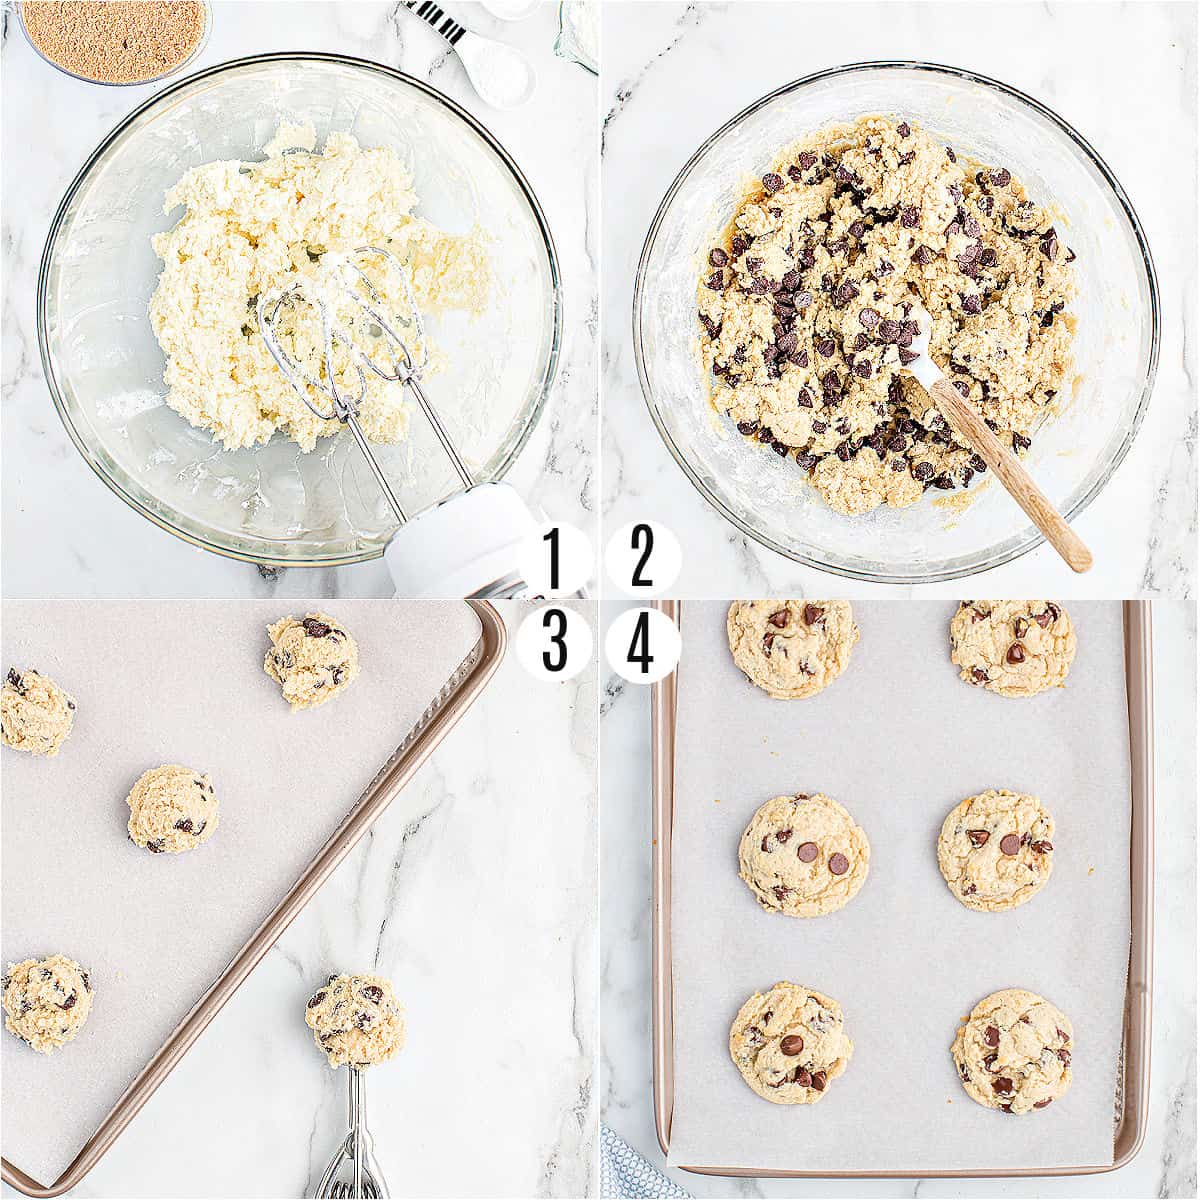 Step by step photos showing how to make soft batch chocolate chip cookies.